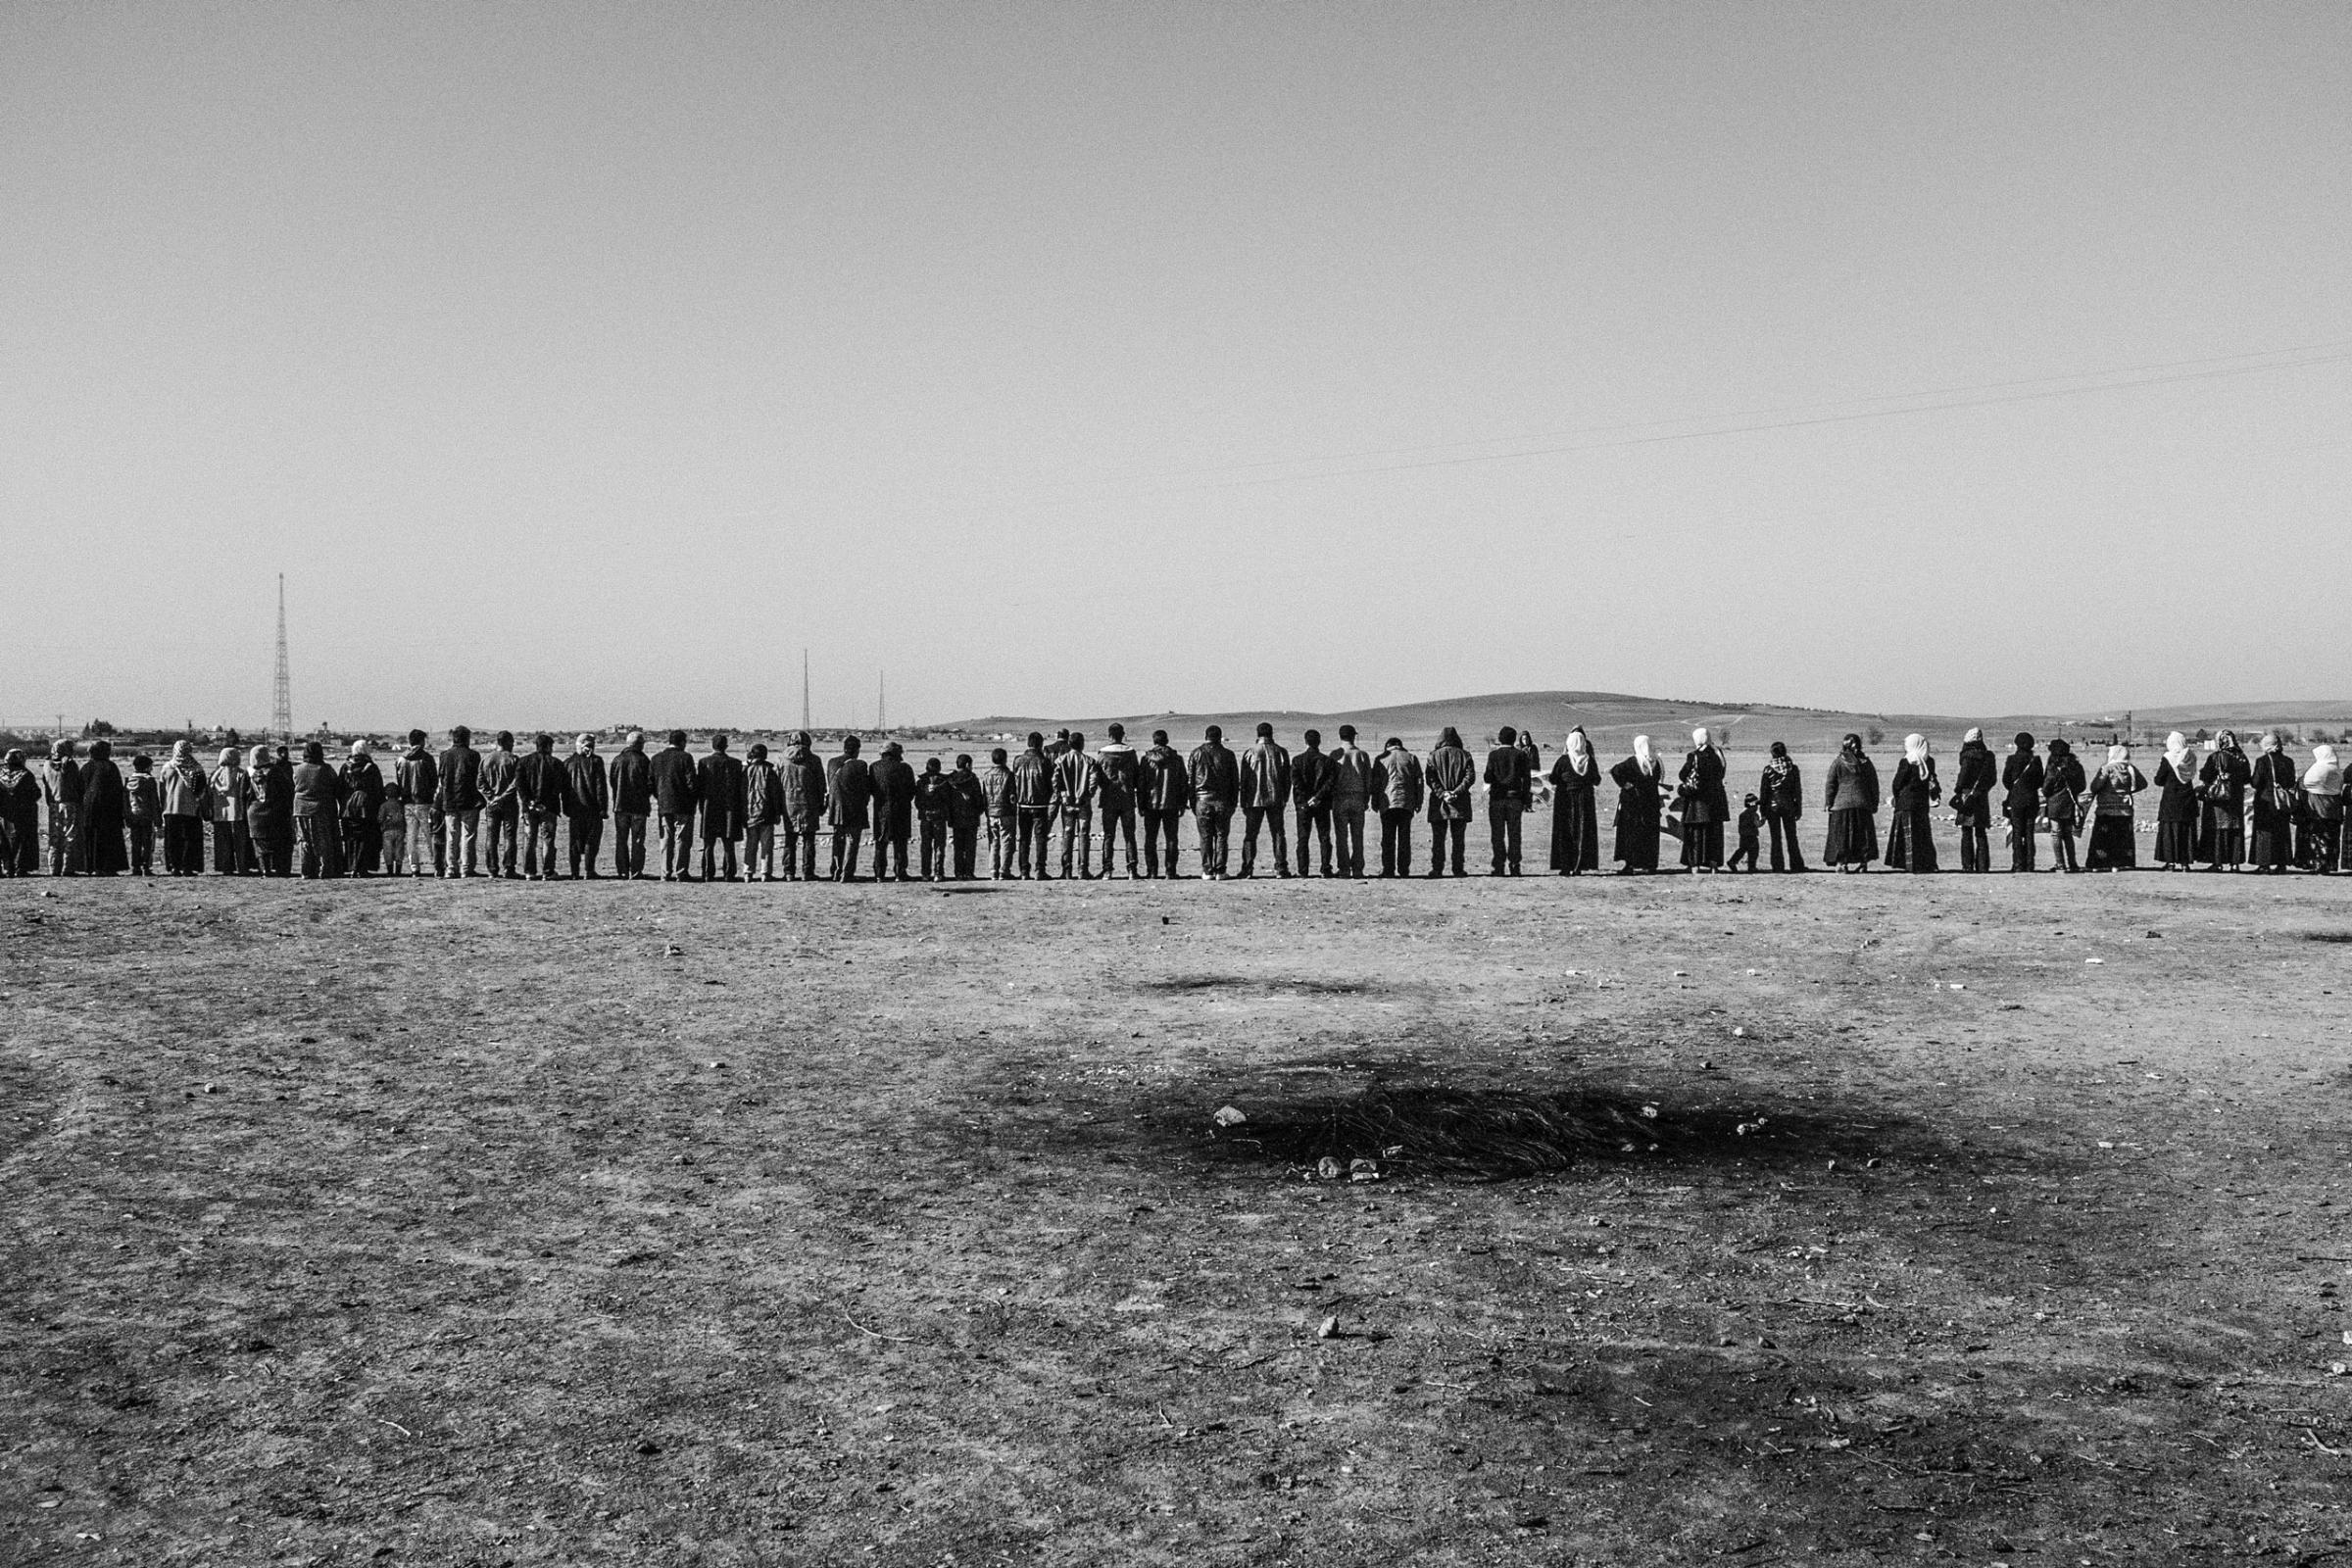 Refugees from Kobani, Syria line up at the Turkish-Syrian border in Suruc, Turkey to support the Kurds fighting against ISIS, Jan. 2015